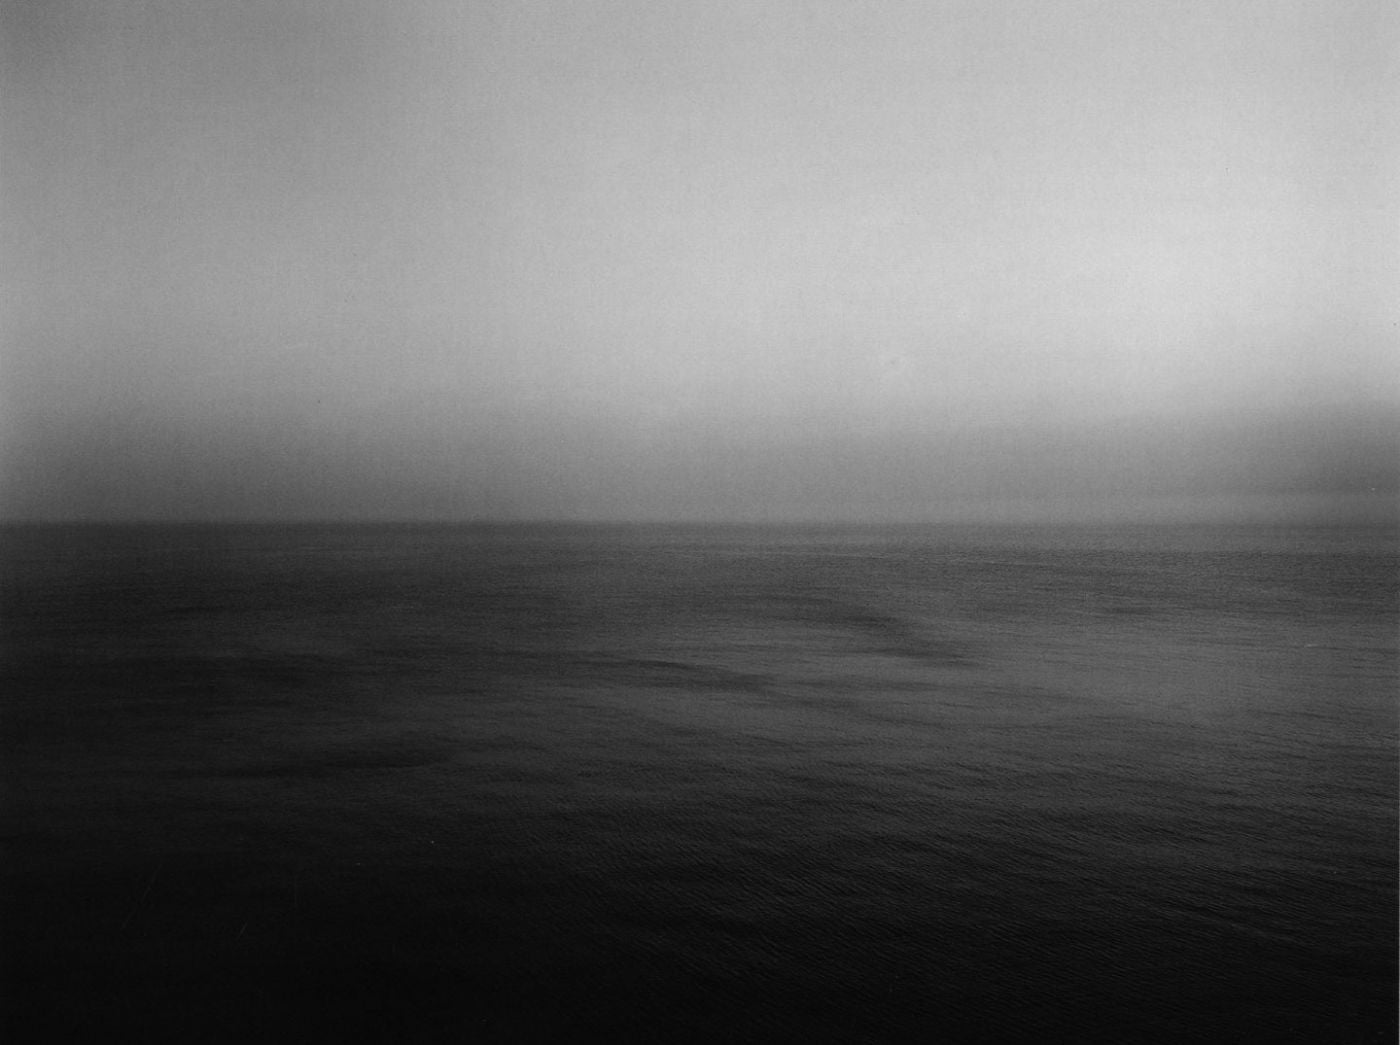 Photographs by Hiroshi Sugimoto: Dioramas, Theaters, Seascapes (Sonnabend Gallery and Sagacho Exhibit Space)